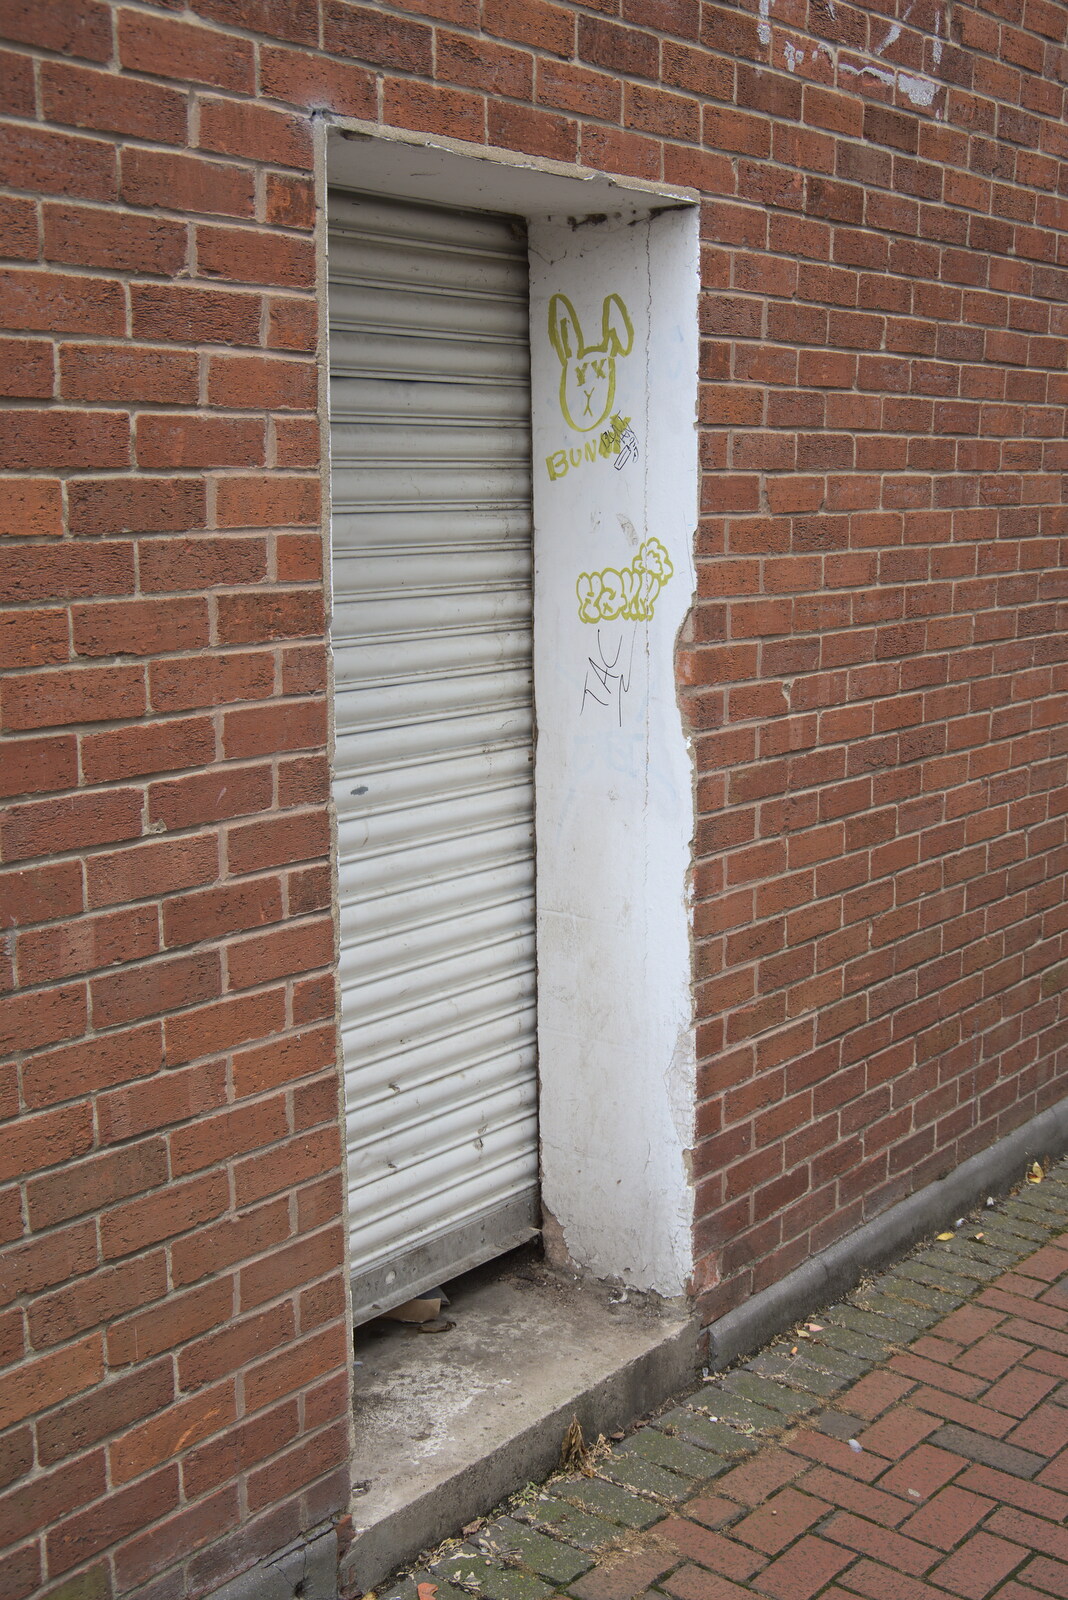 Dead bunny graffiti behind Argos from Pork Pies and Dockside Dereliction, Melton Mowbray and Liverpool - 7th August 2021